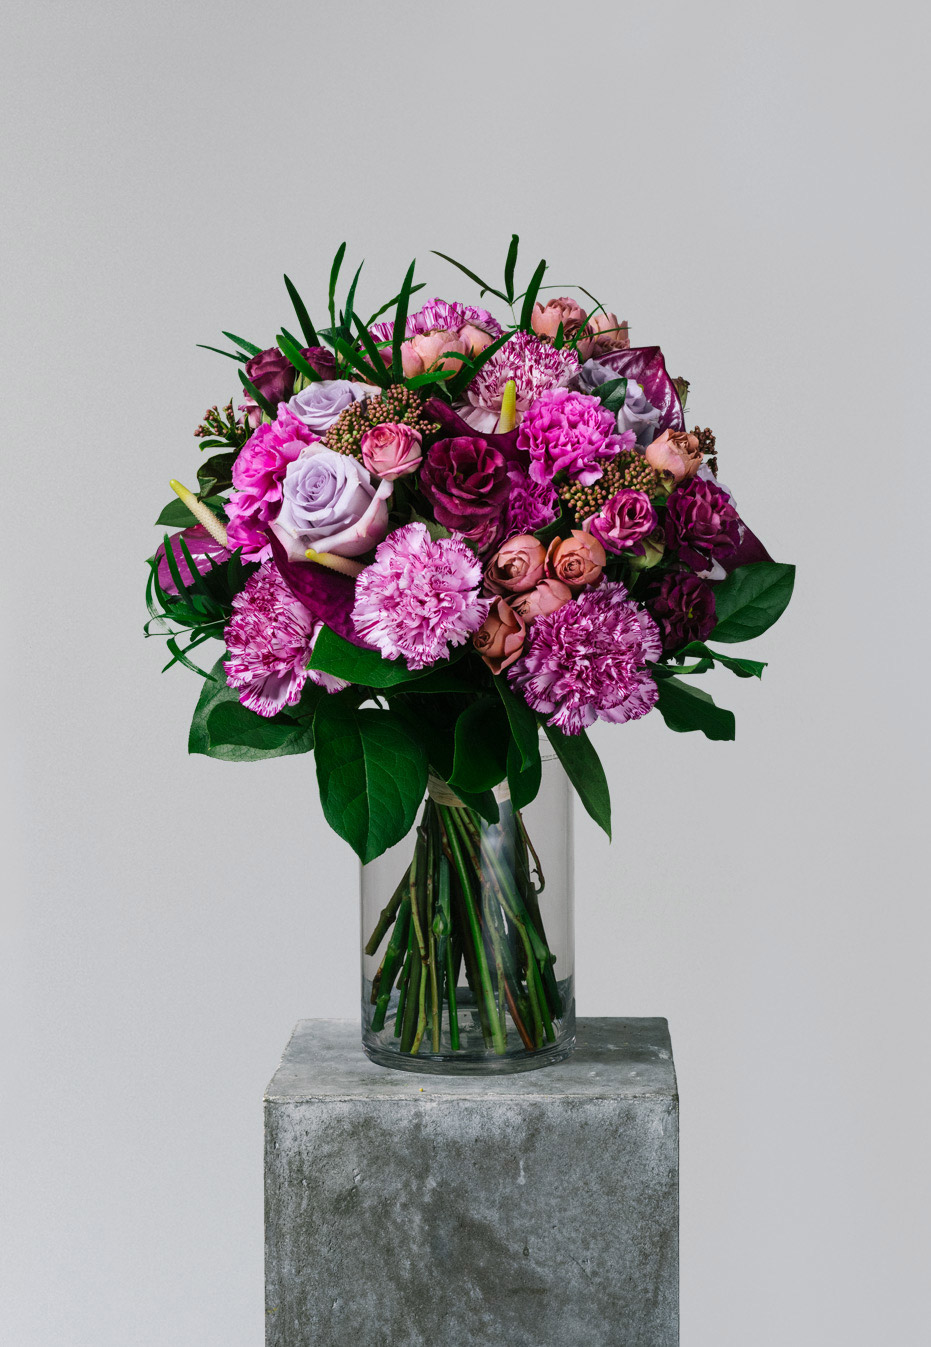 flower bouquet of carnation and rose by flannel flowers